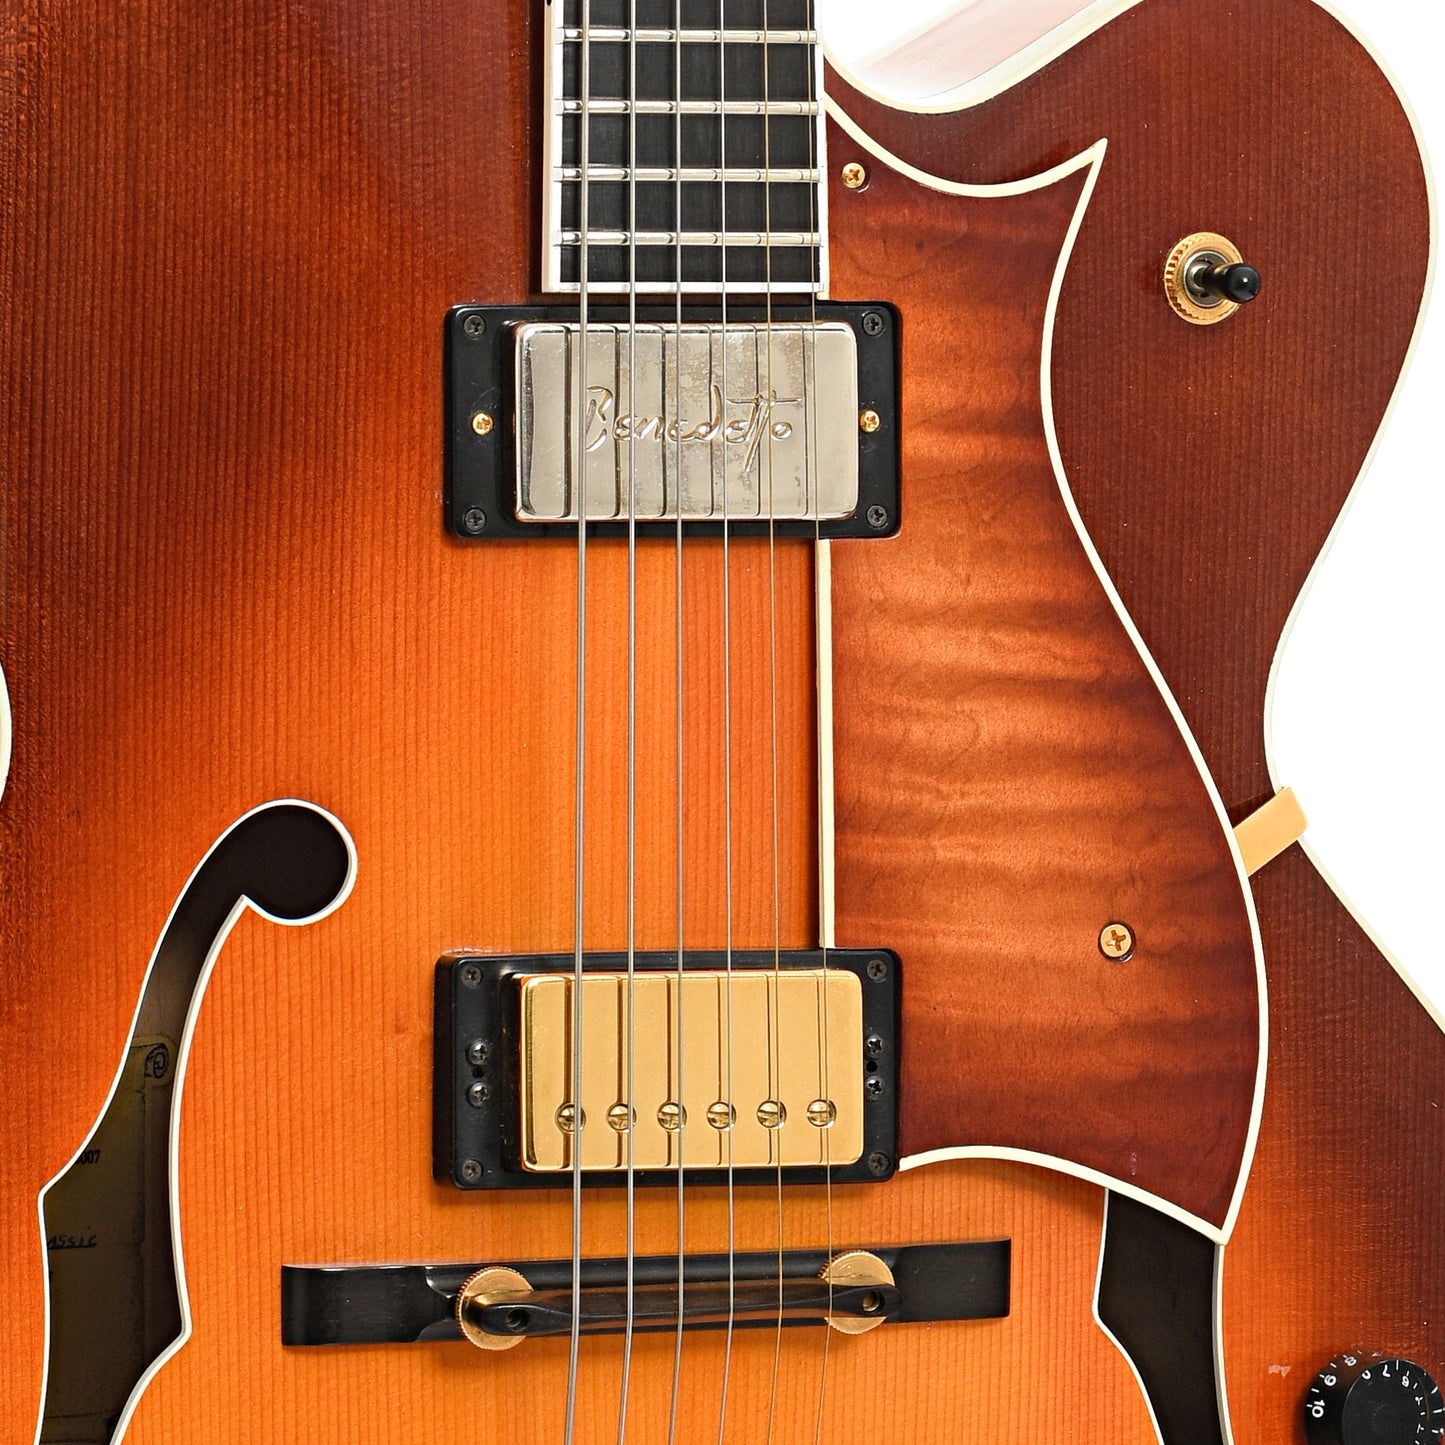 Pickups of Heritage Eagle Classic Hollowbody Electric Guitar (1992)